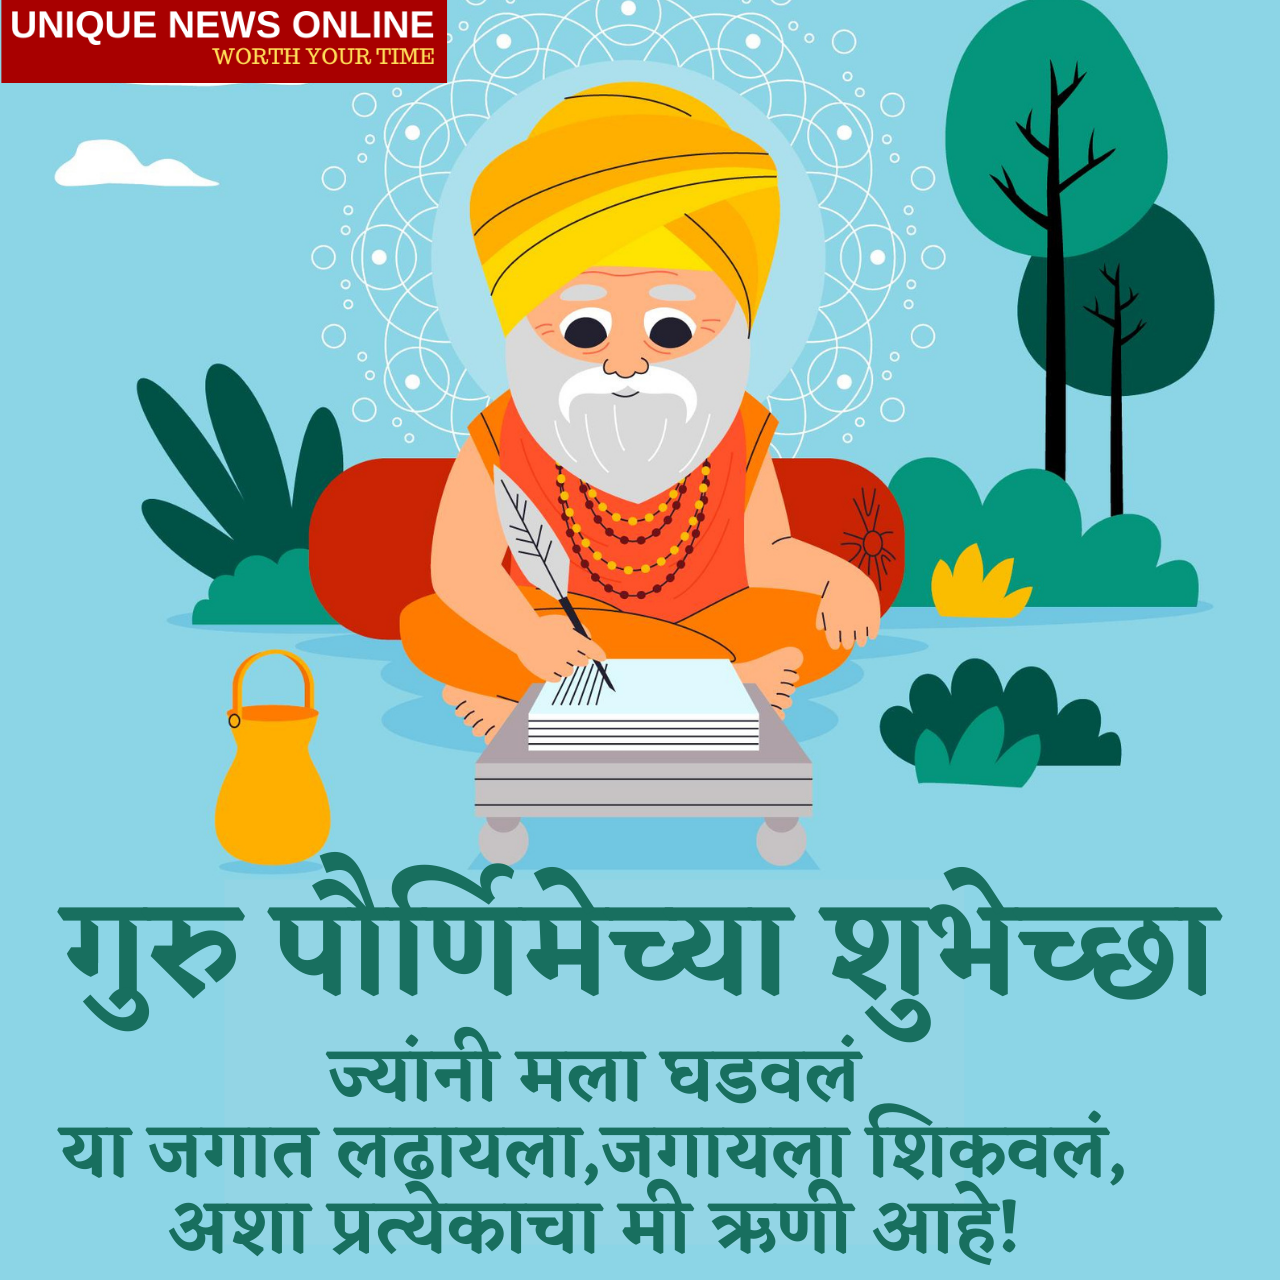 Guru Purnima 2021 Marathi and Gujarati Quotes, HD Images, Wishes, Status, Greetings, and Messages to share